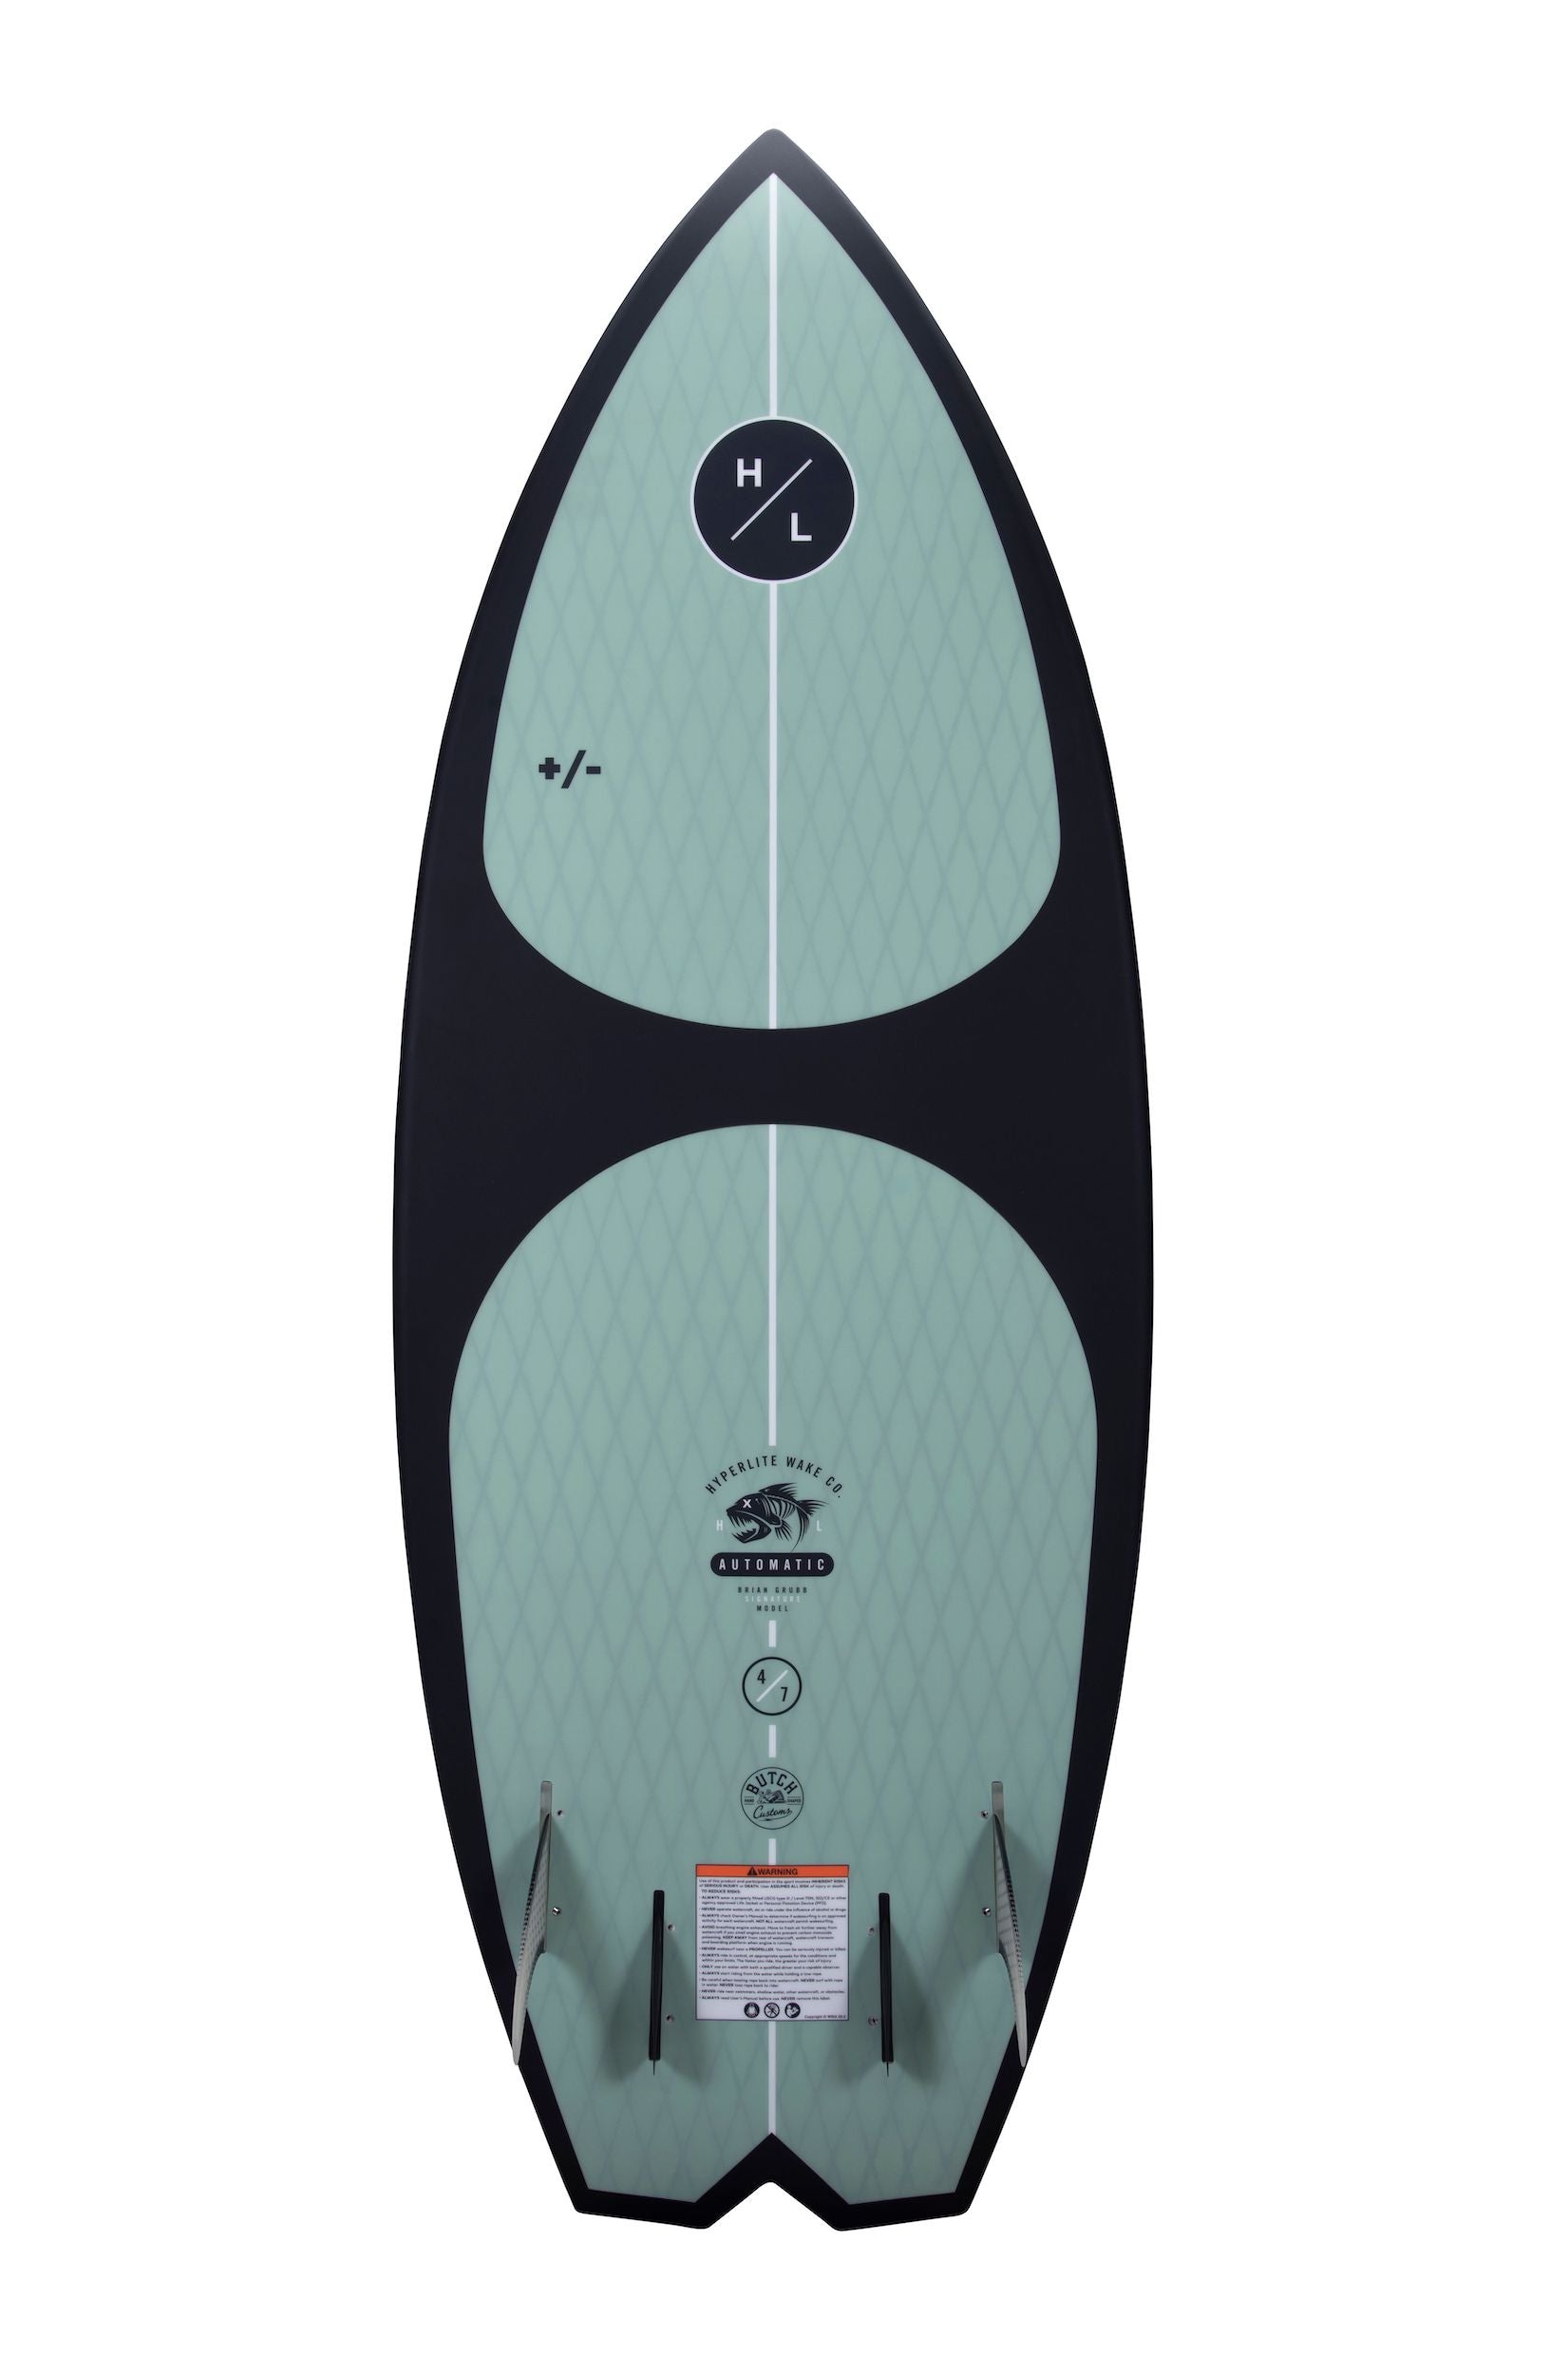 A Hyperlite 2023 Automatic Wakesurf Board with DuraShell Construction on a white background.